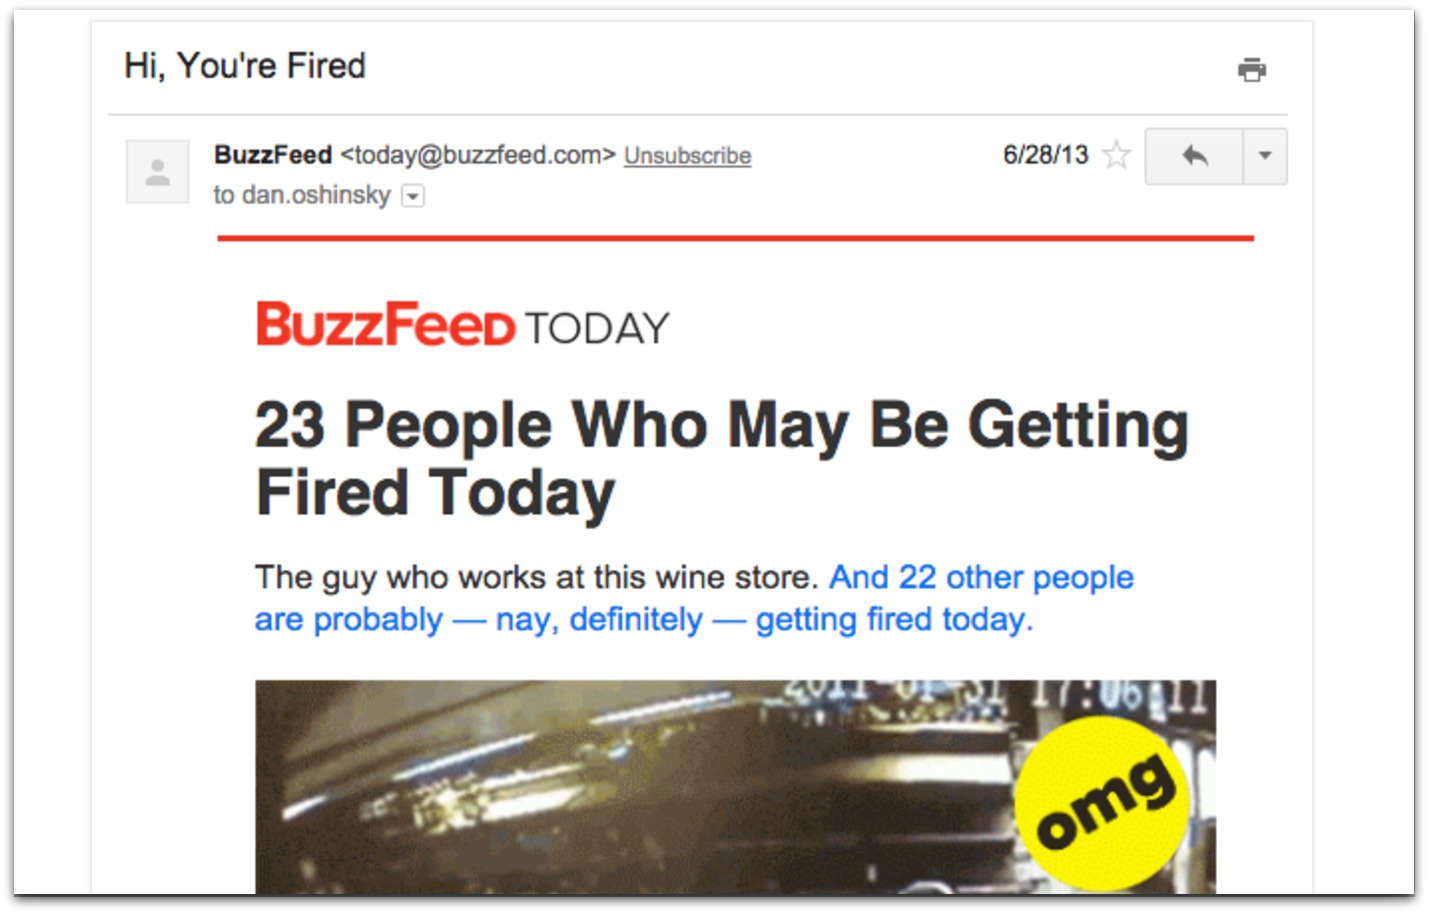 buzzfeed email